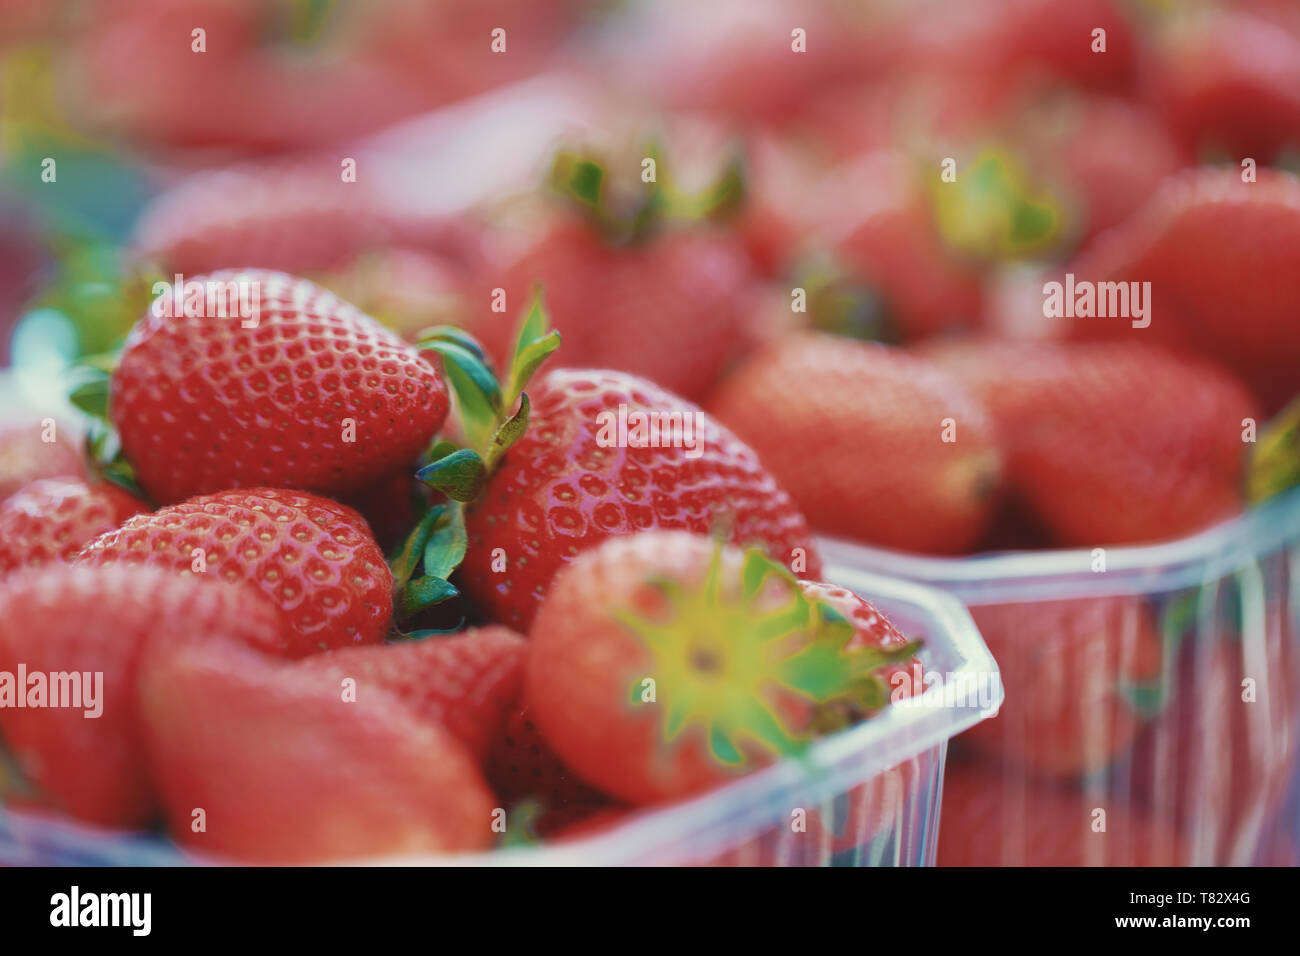 Fresh red tasty strawberries on tablet at market closeup, outdoors, depth of field Stock Photo